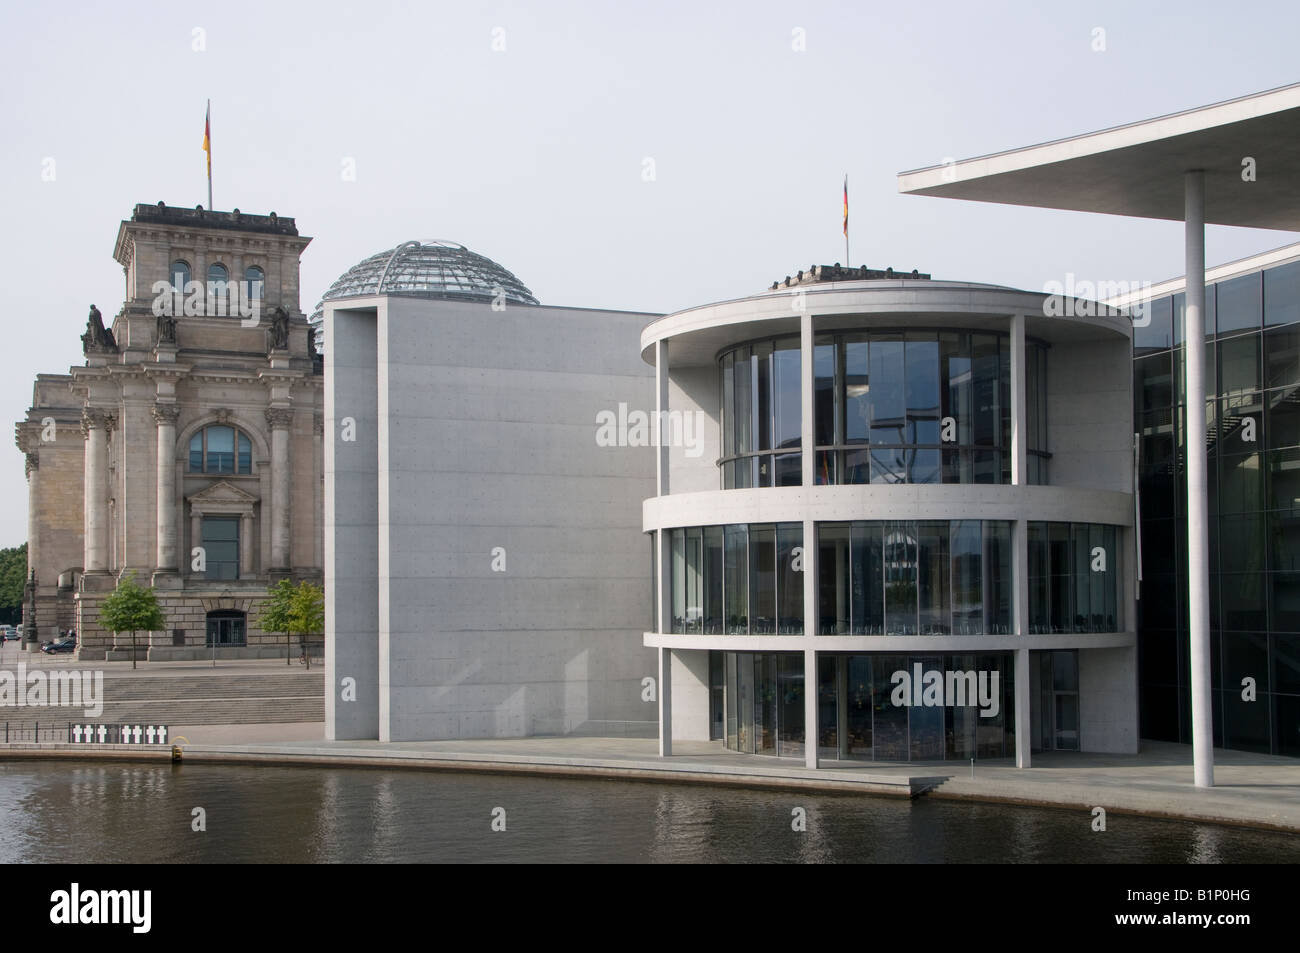 View of the Paul Lobe Haus, Parliament Building with the Reichstag building in background in Berlin Germany Stock Photo